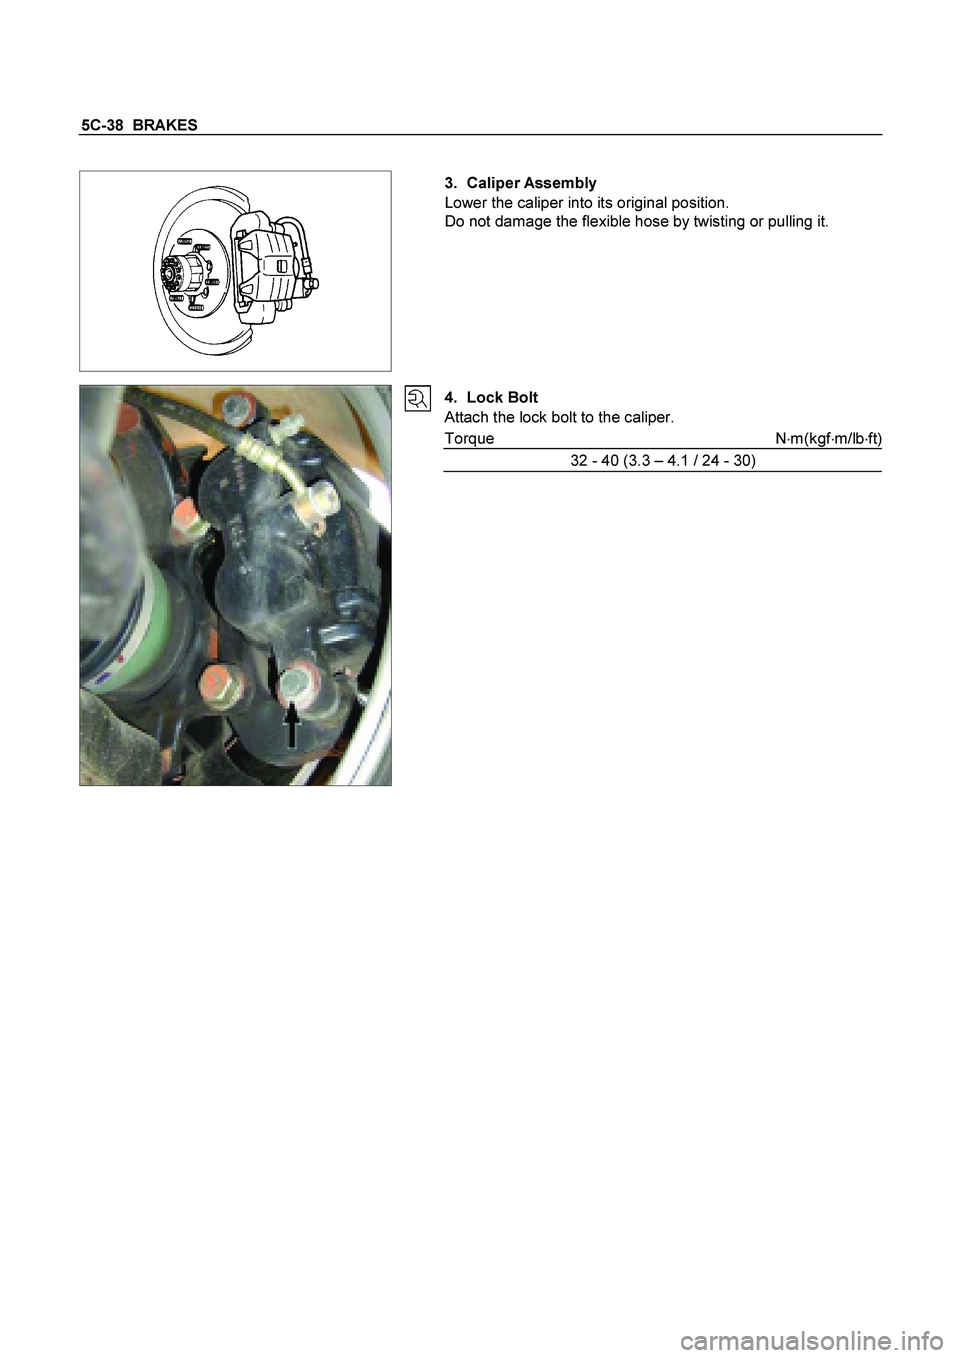 ISUZU TF SERIES 2004  Workshop Manual 5C-38  BRAKES
 
 
 
   
 
 3. Caliper Assembly 
Lower the caliper into its original position. 
Do not damage the flexible hose by twisting or pulling it. 
 
  
 4. Lock Bolt 
Attach the lock bolt to t